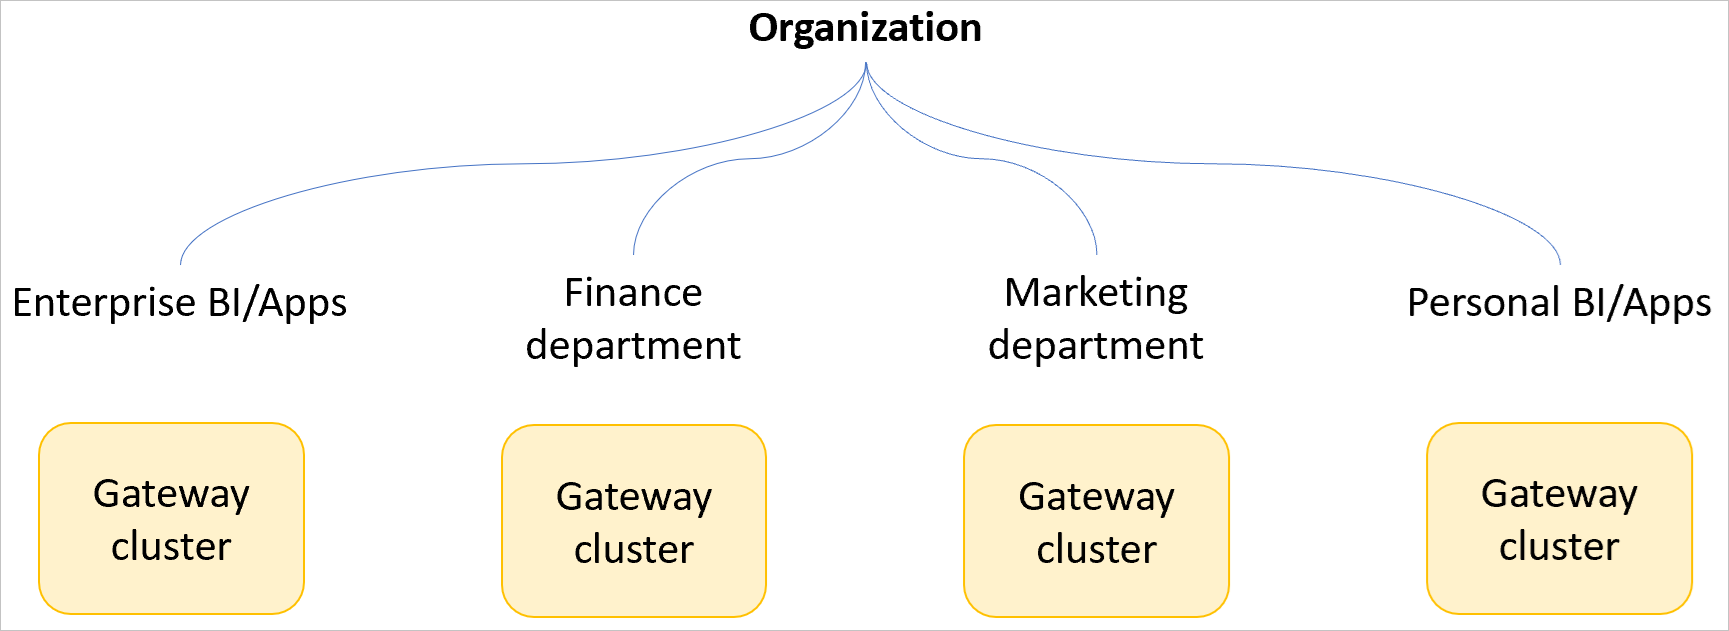 Image of an example organization with separate gateway clusters for enterprise BI and apps, the finance department, the marketing department, and personal BI and apps.